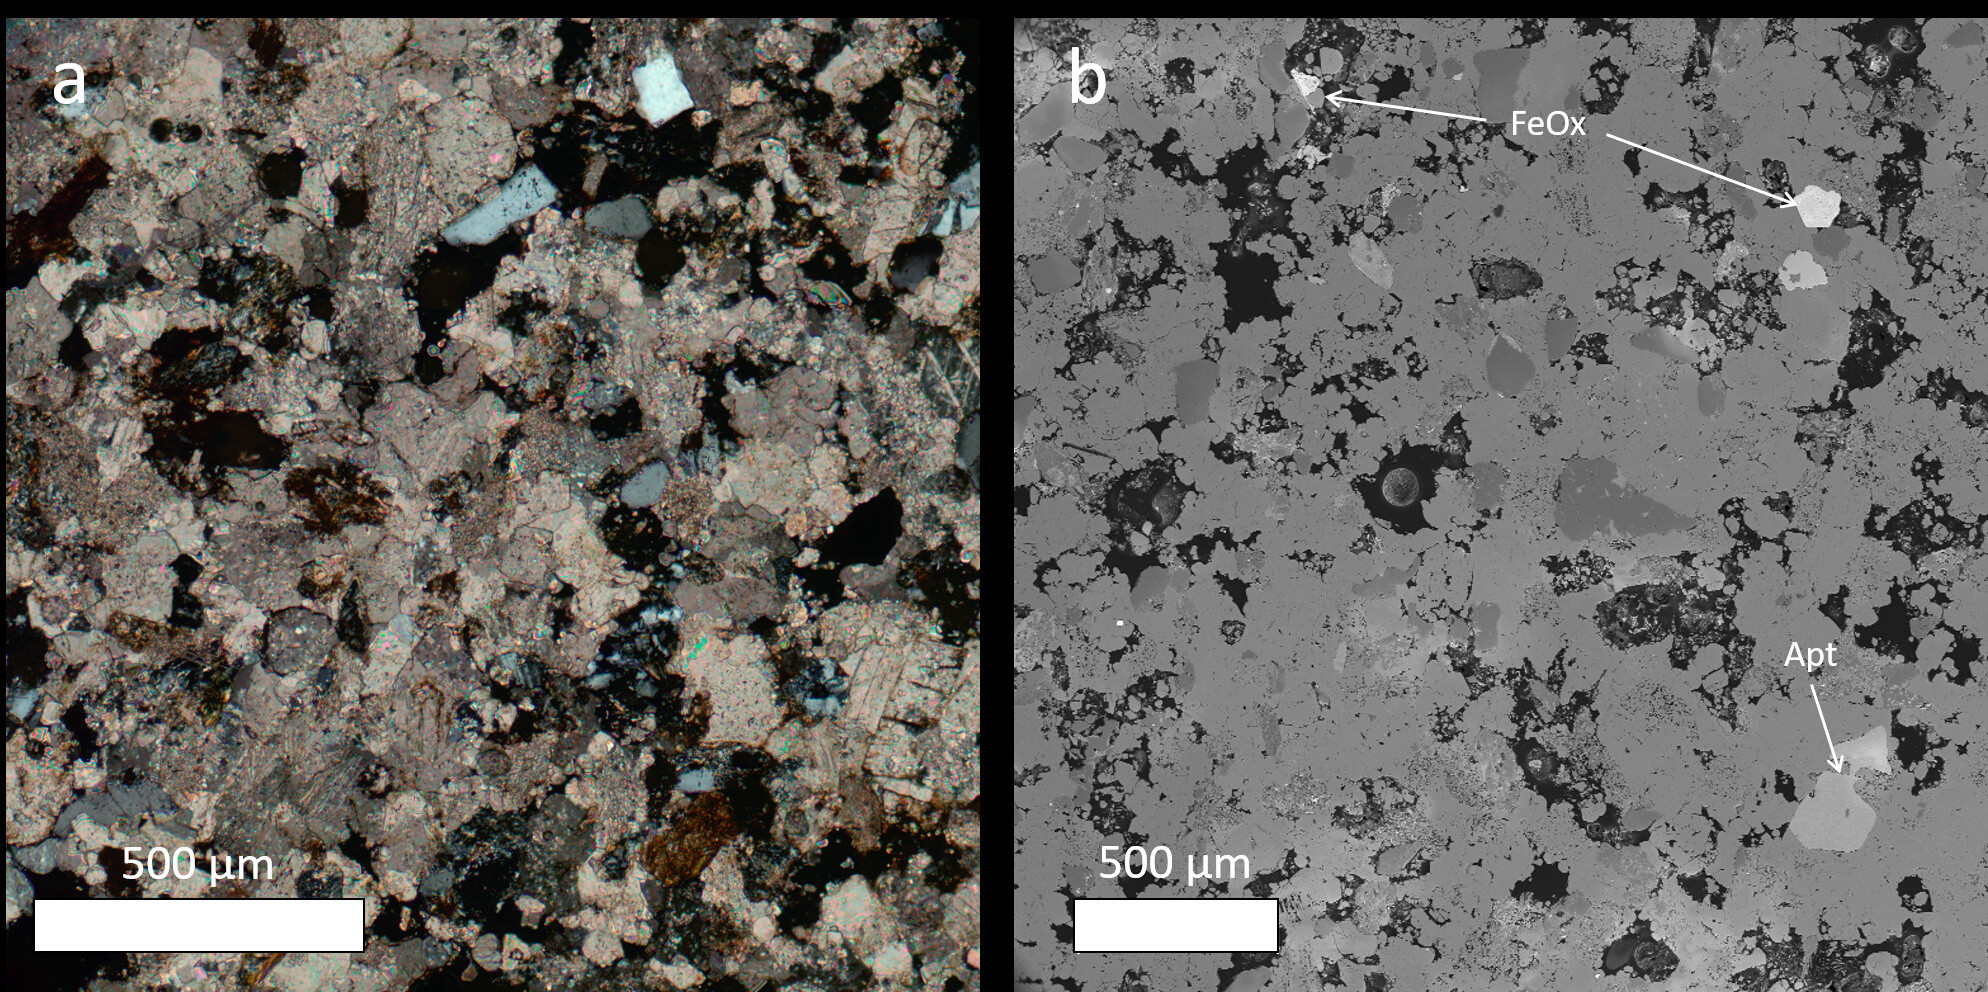 Two thin-sections of stone samples taken from tomb effigy of Ermengol VII showing abundant carbonate fraction and few scattered silicates grains in dark grey. Bright iron oxides (FeOx) and a large apatite grain (Apt) are also visible.